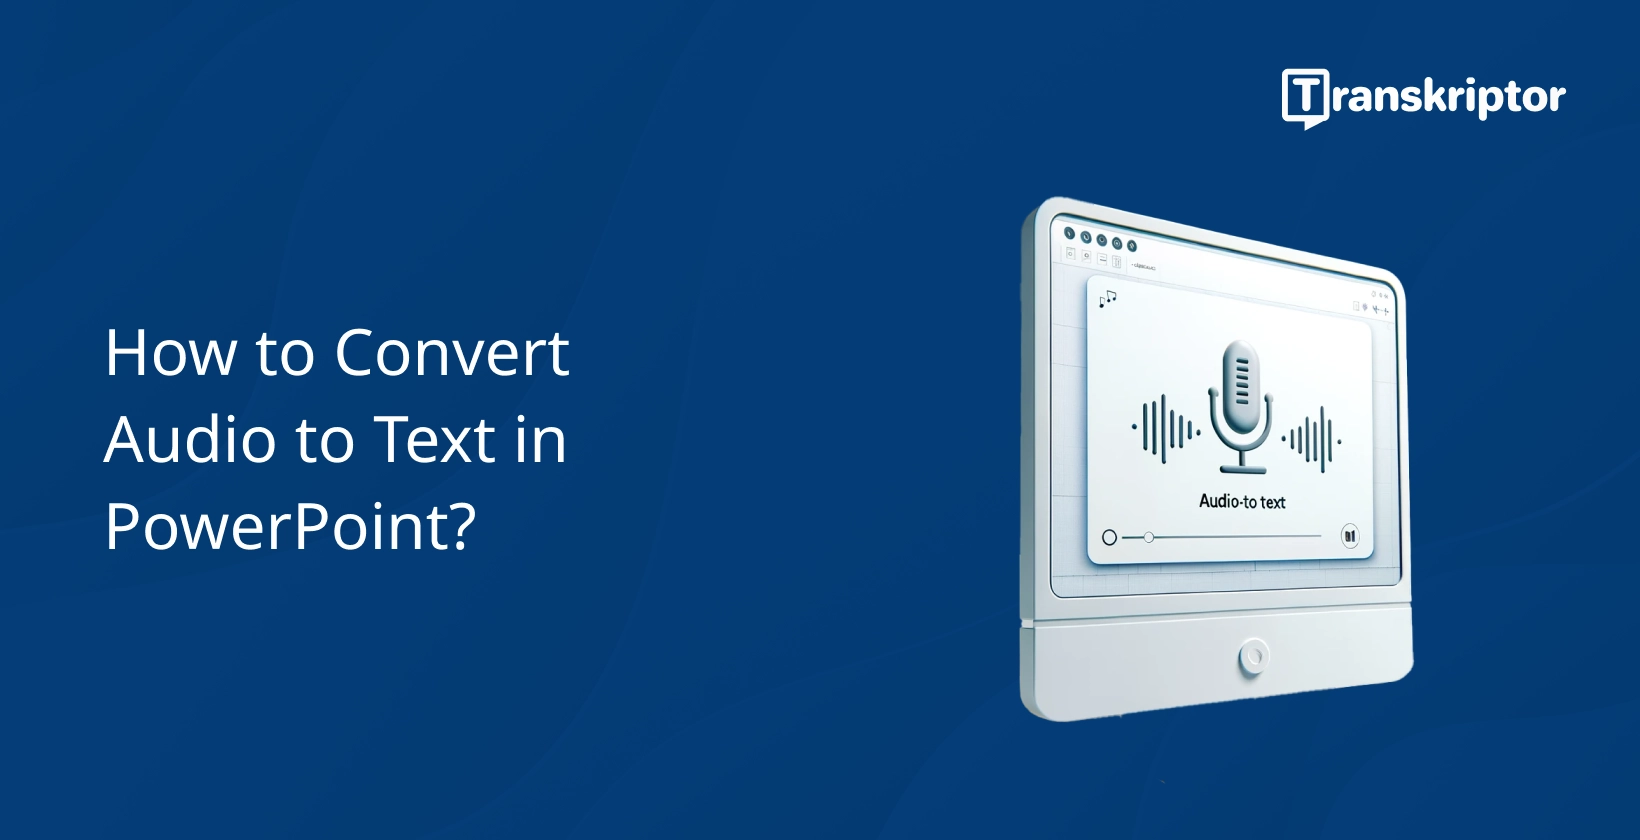 Converting audio to text in PowerPoint demonstrated with presentation slide.